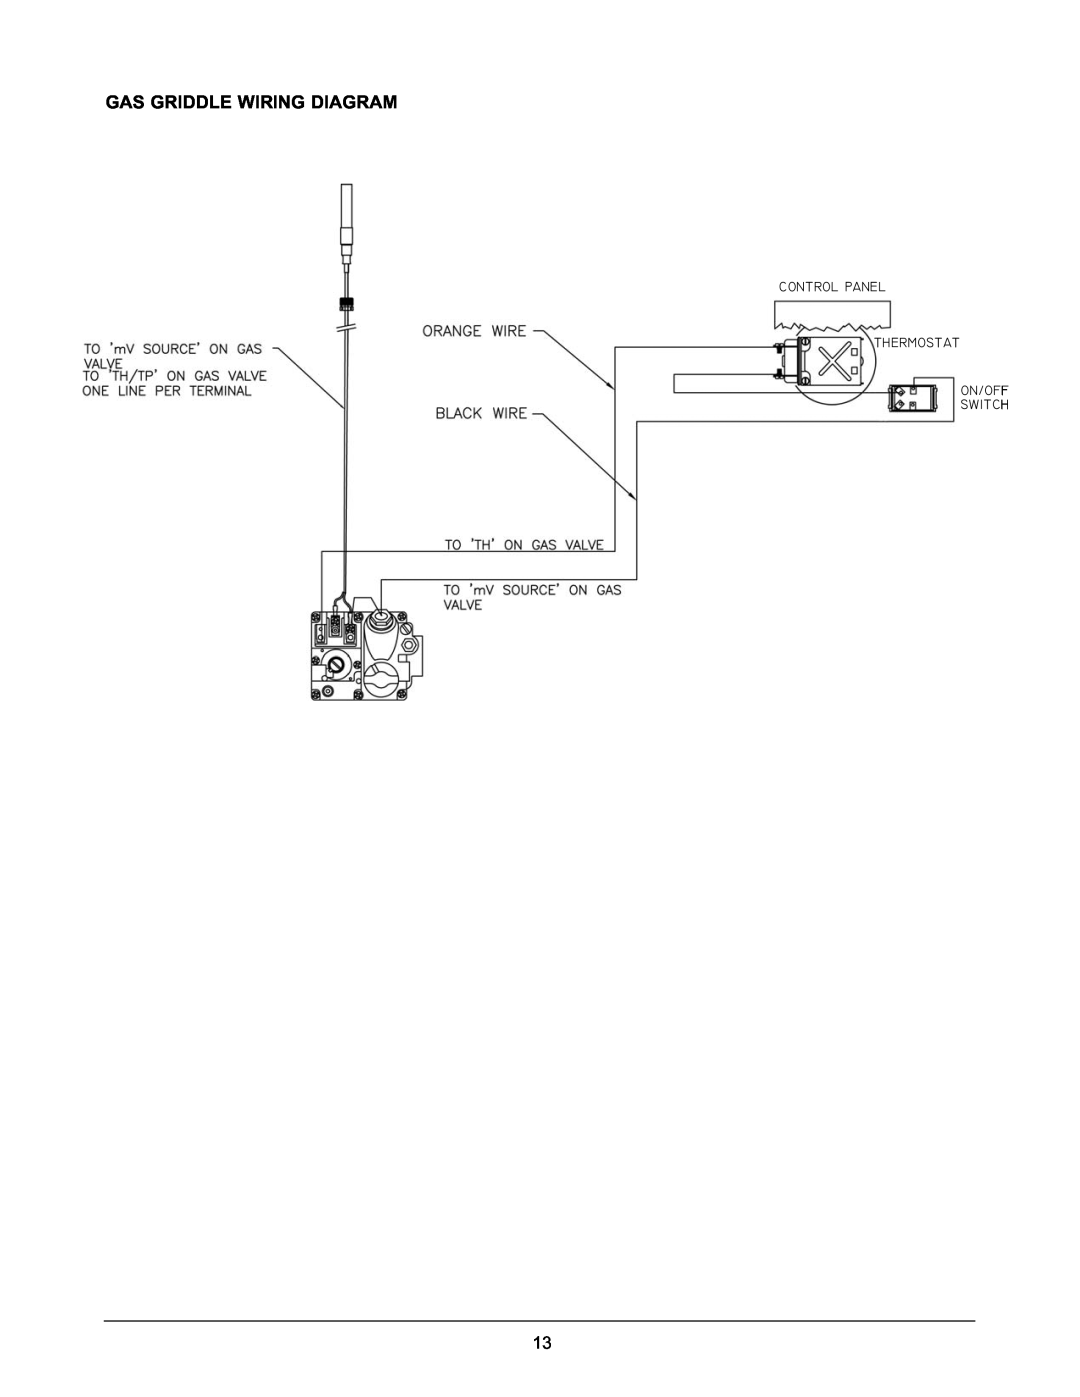 Keating Of Chicago Miraclean installation manual Gas Griddle Wiring Diagram, Control Panel Thermostat On/Off Switch 